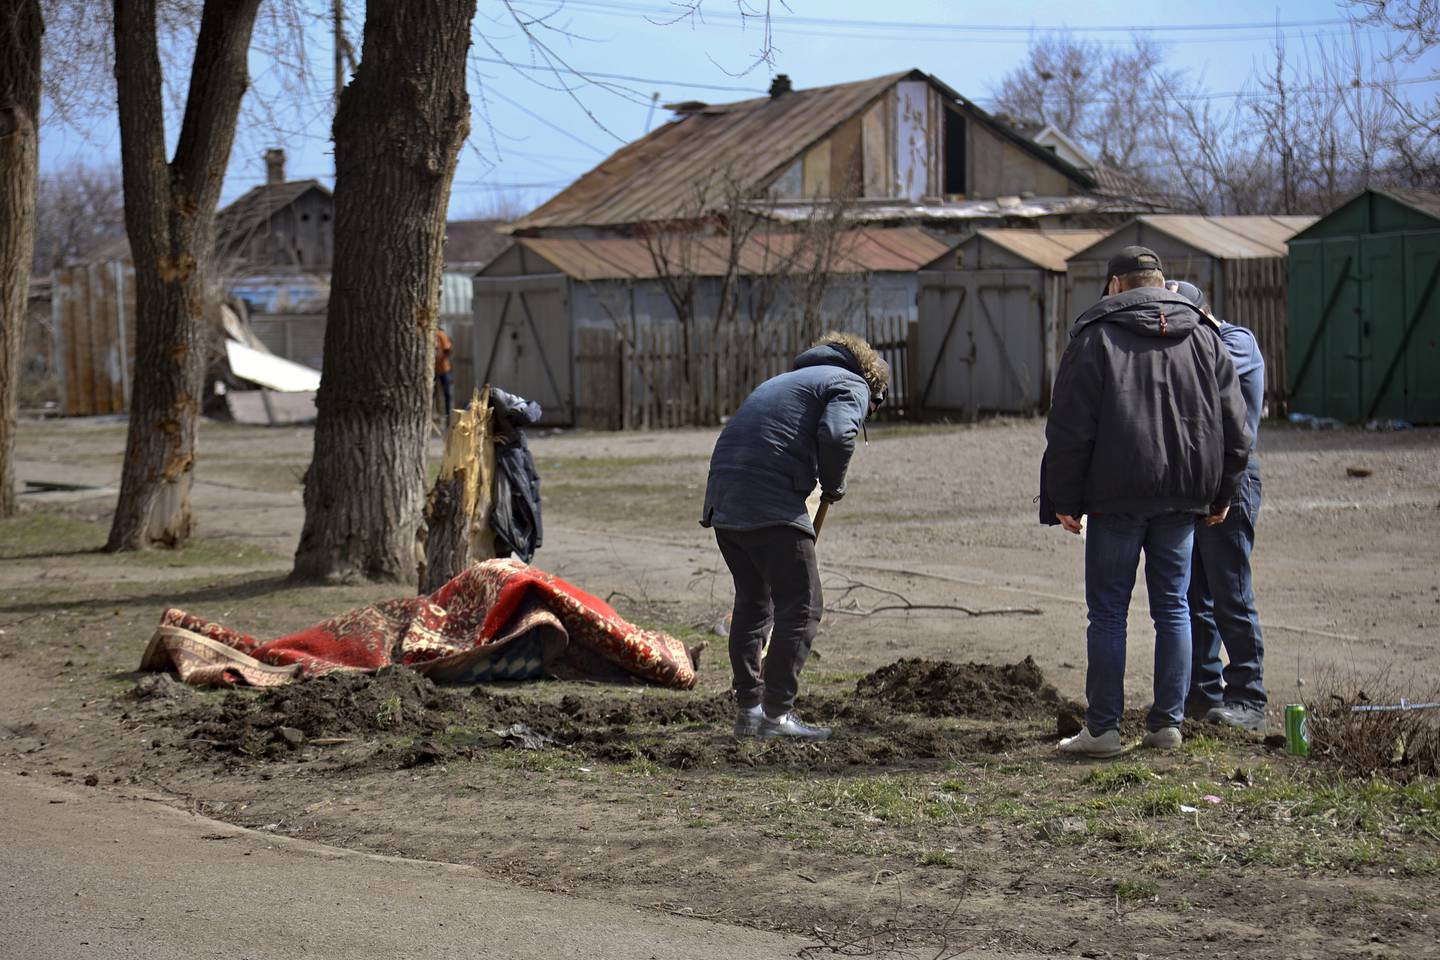 A man digs a grave to bury the body of a victim from fighting on the outskirts of Mariupol, Ukraine, in territory under control of the separatist government of the Donetsk People's Republic, on Tuesday, March 29, 2022. (AP Photo/Alexei Alexandrov)